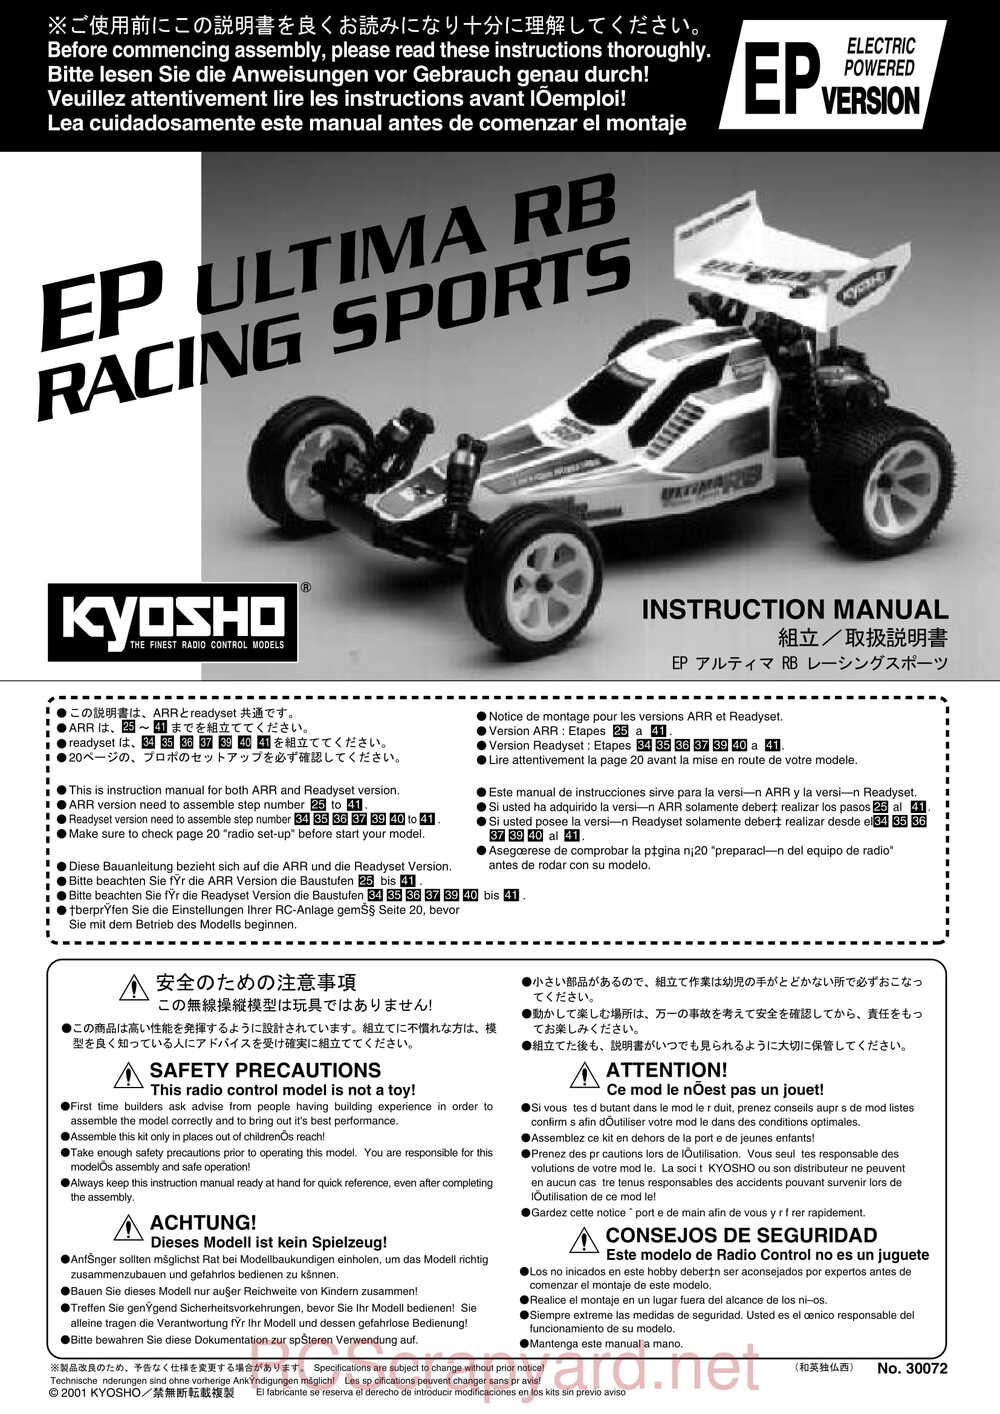 Kyosho - 30072 - EP-Ultima-RB-Racing-Sports - Manual - Page 01